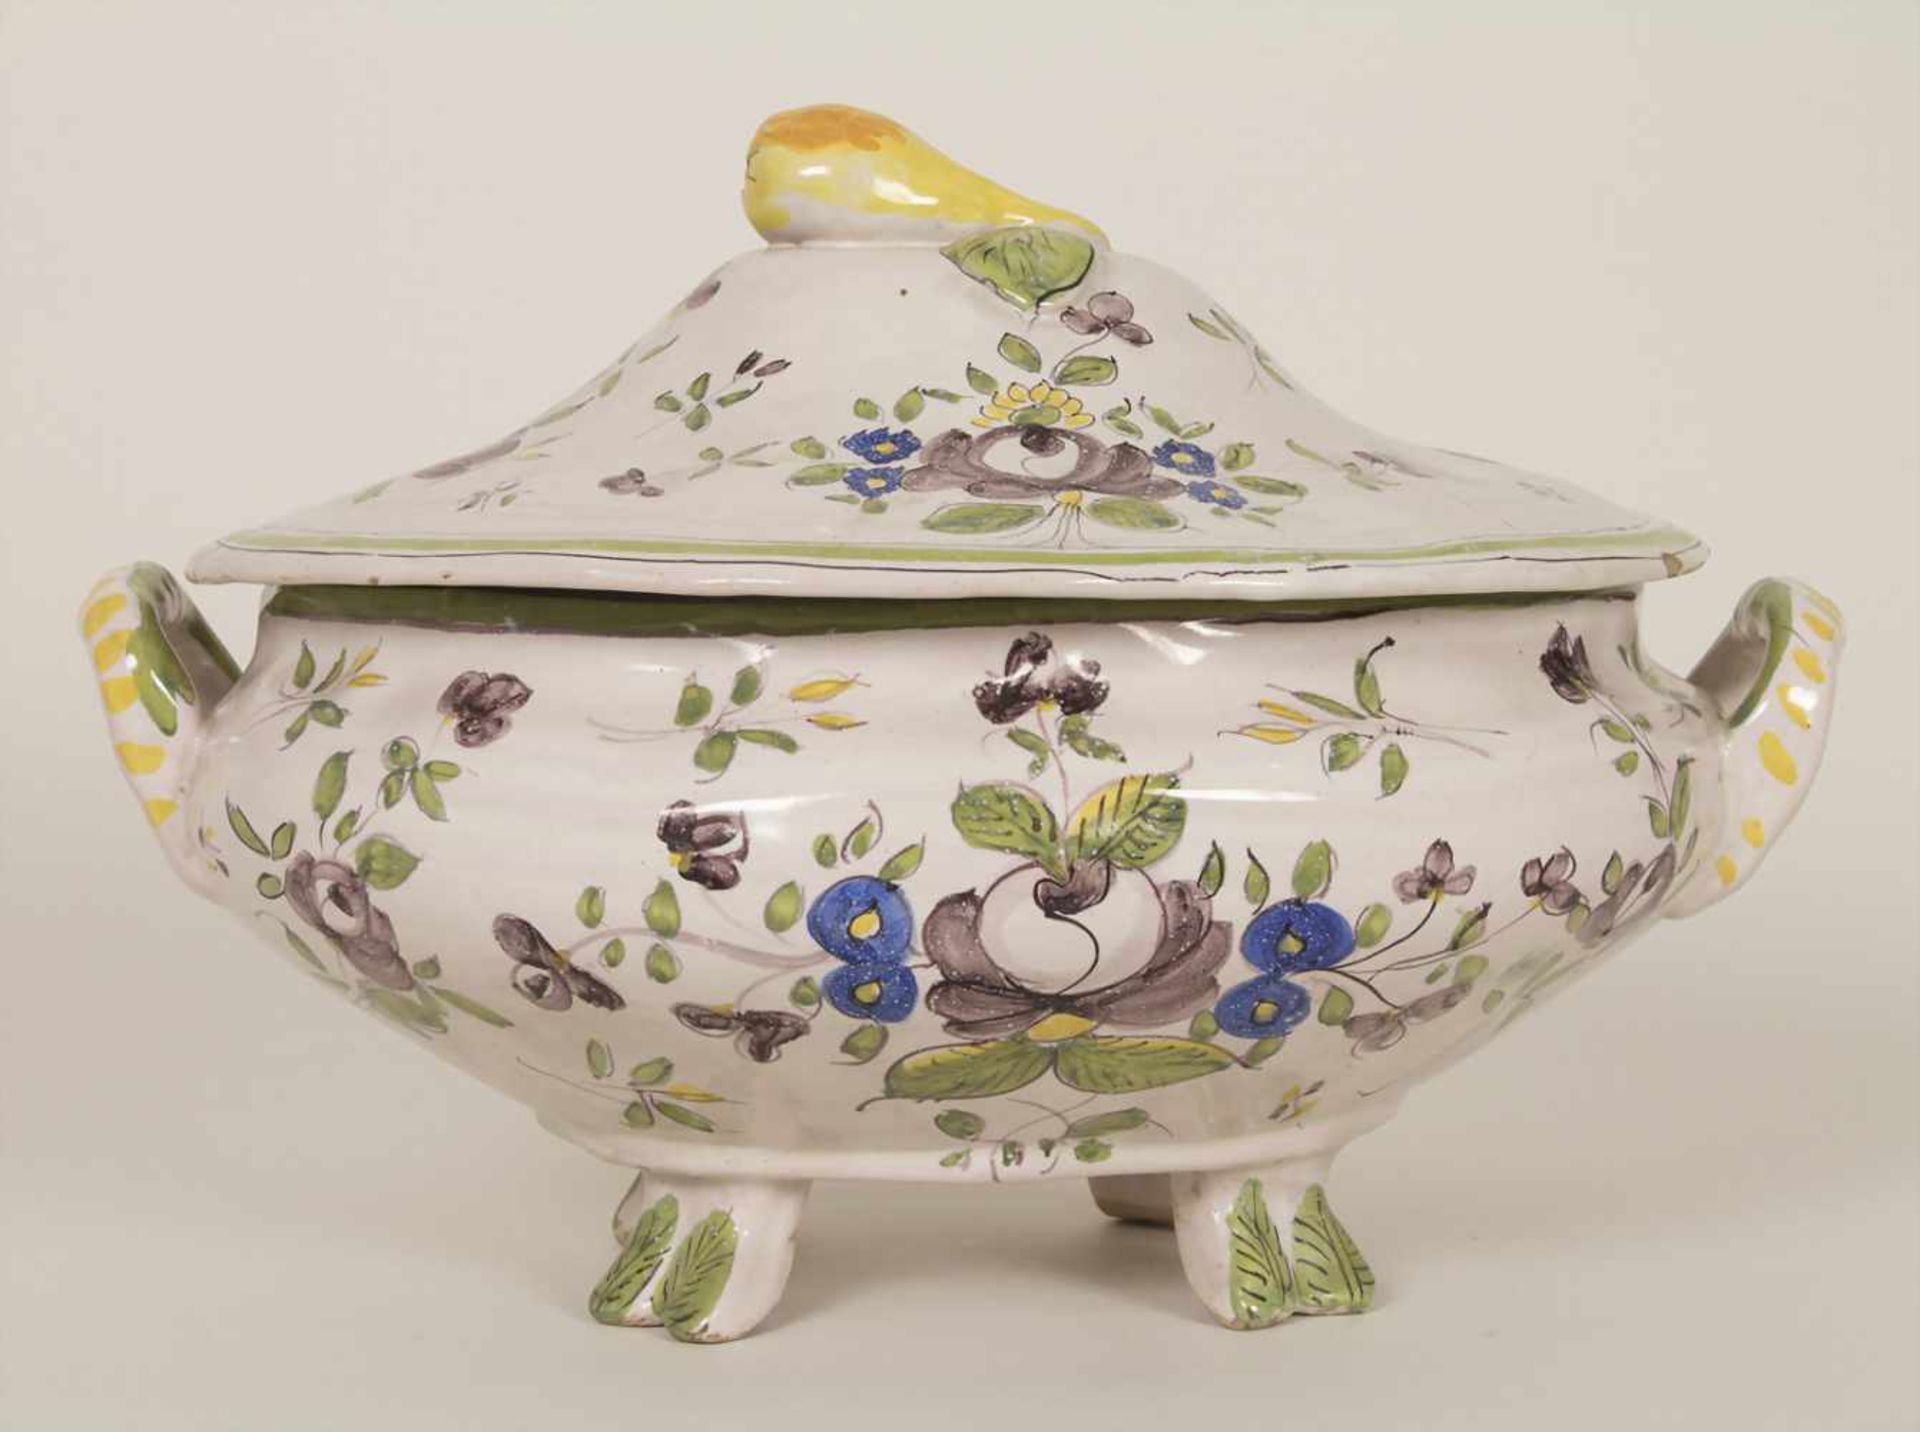 Fayence-Deckelterinne / A faience covered tureen, 18./19. Jh.Material: Keramik, floral polychrom - Bild 3 aus 8